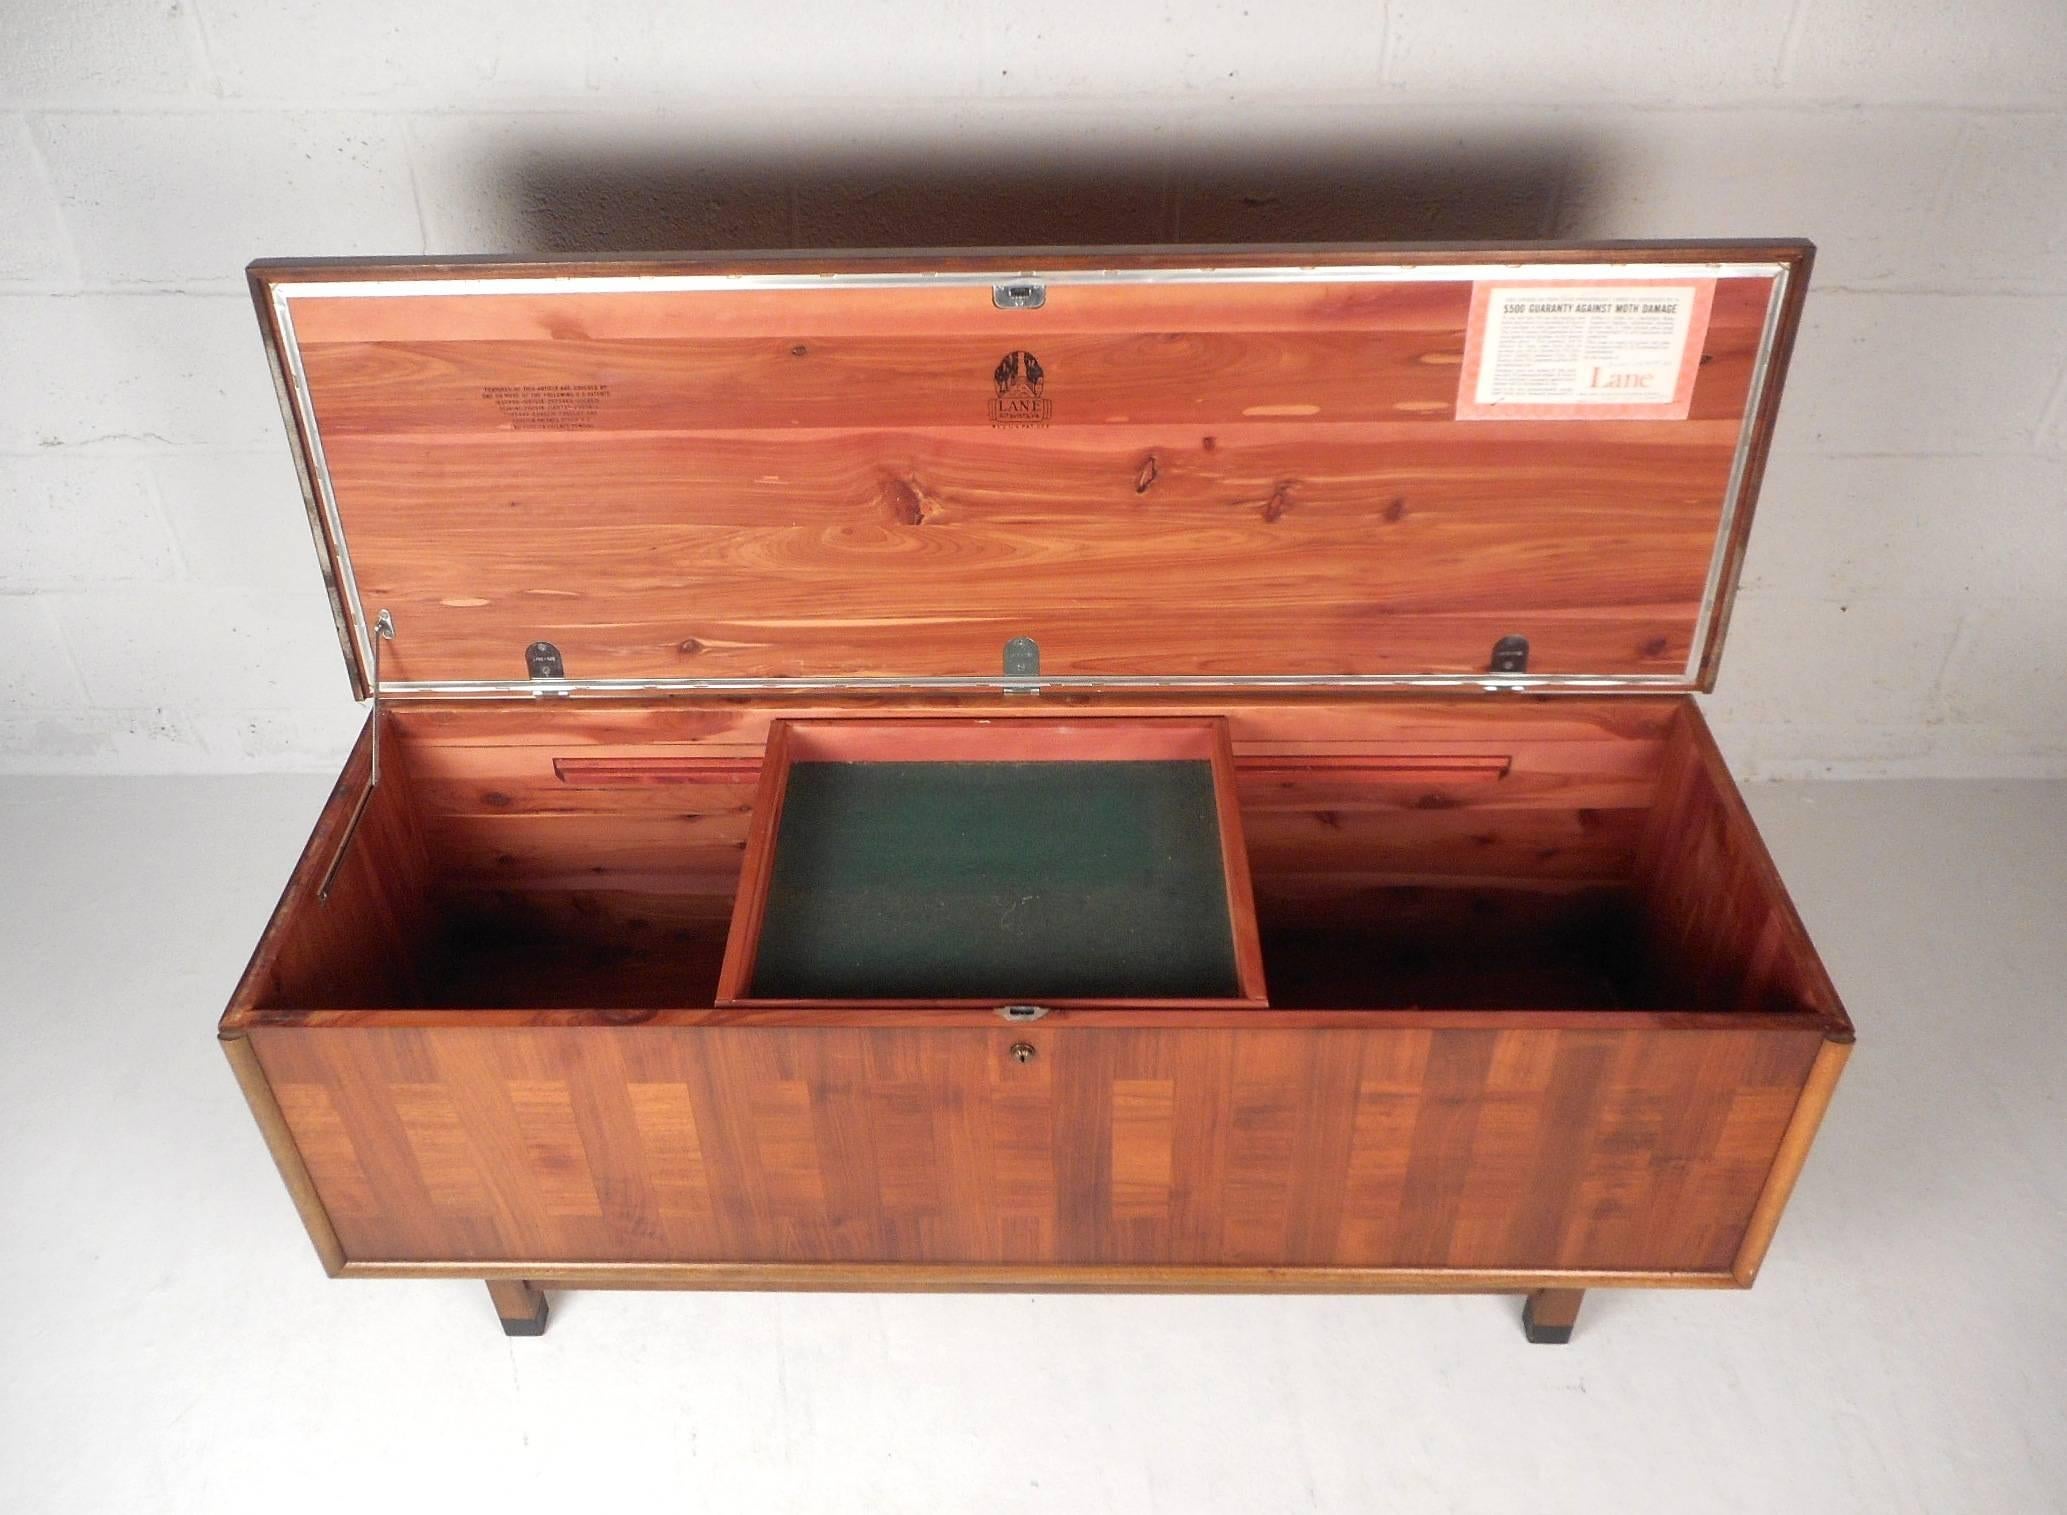 This beautiful vintage modern cedar chest opens up to unveil a sliding removable shelf and a large storage compartment. Stunning walnut wood grain with lovely oak trim around the front adding to the allure. This stylish case piece opens up with a